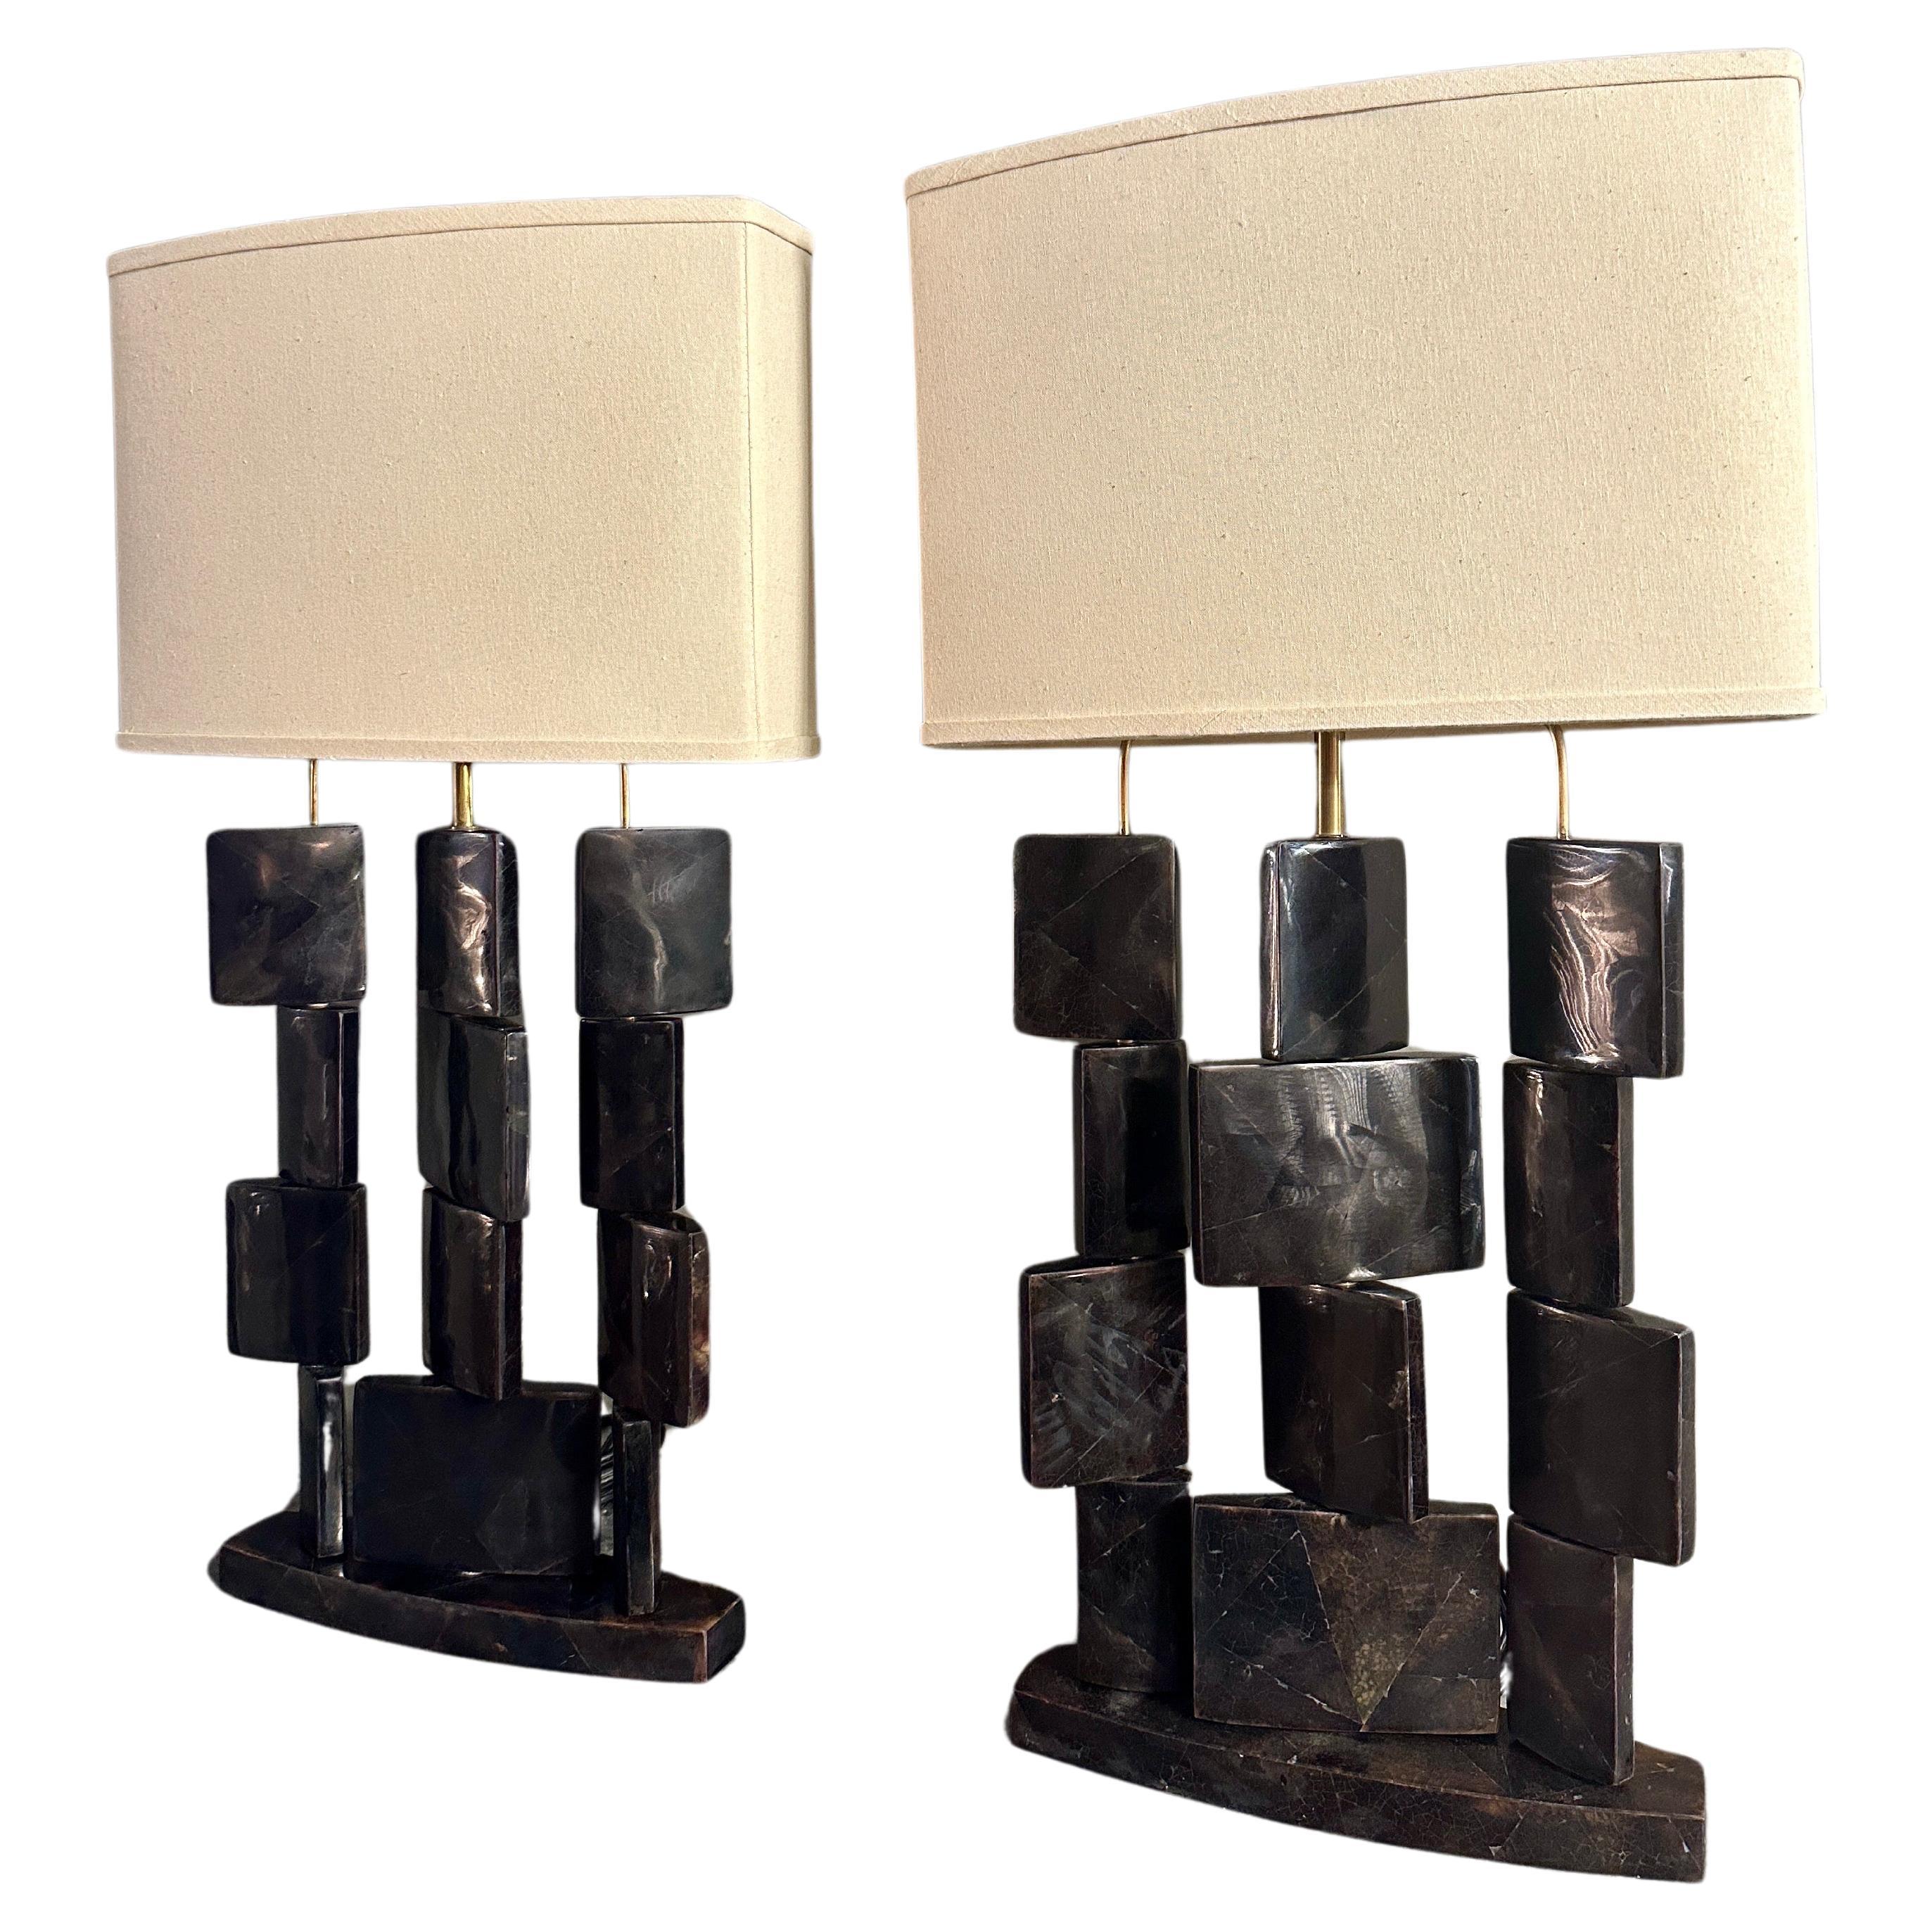 A Pair of  Pen shell and brass table lamps by R&Y Augousti Paris, with stacked movable geometric shaped pieces on brass supports and stood on oval shaped bases. Original linen covered hard backed shades. Augousti renowned for their use of exotic